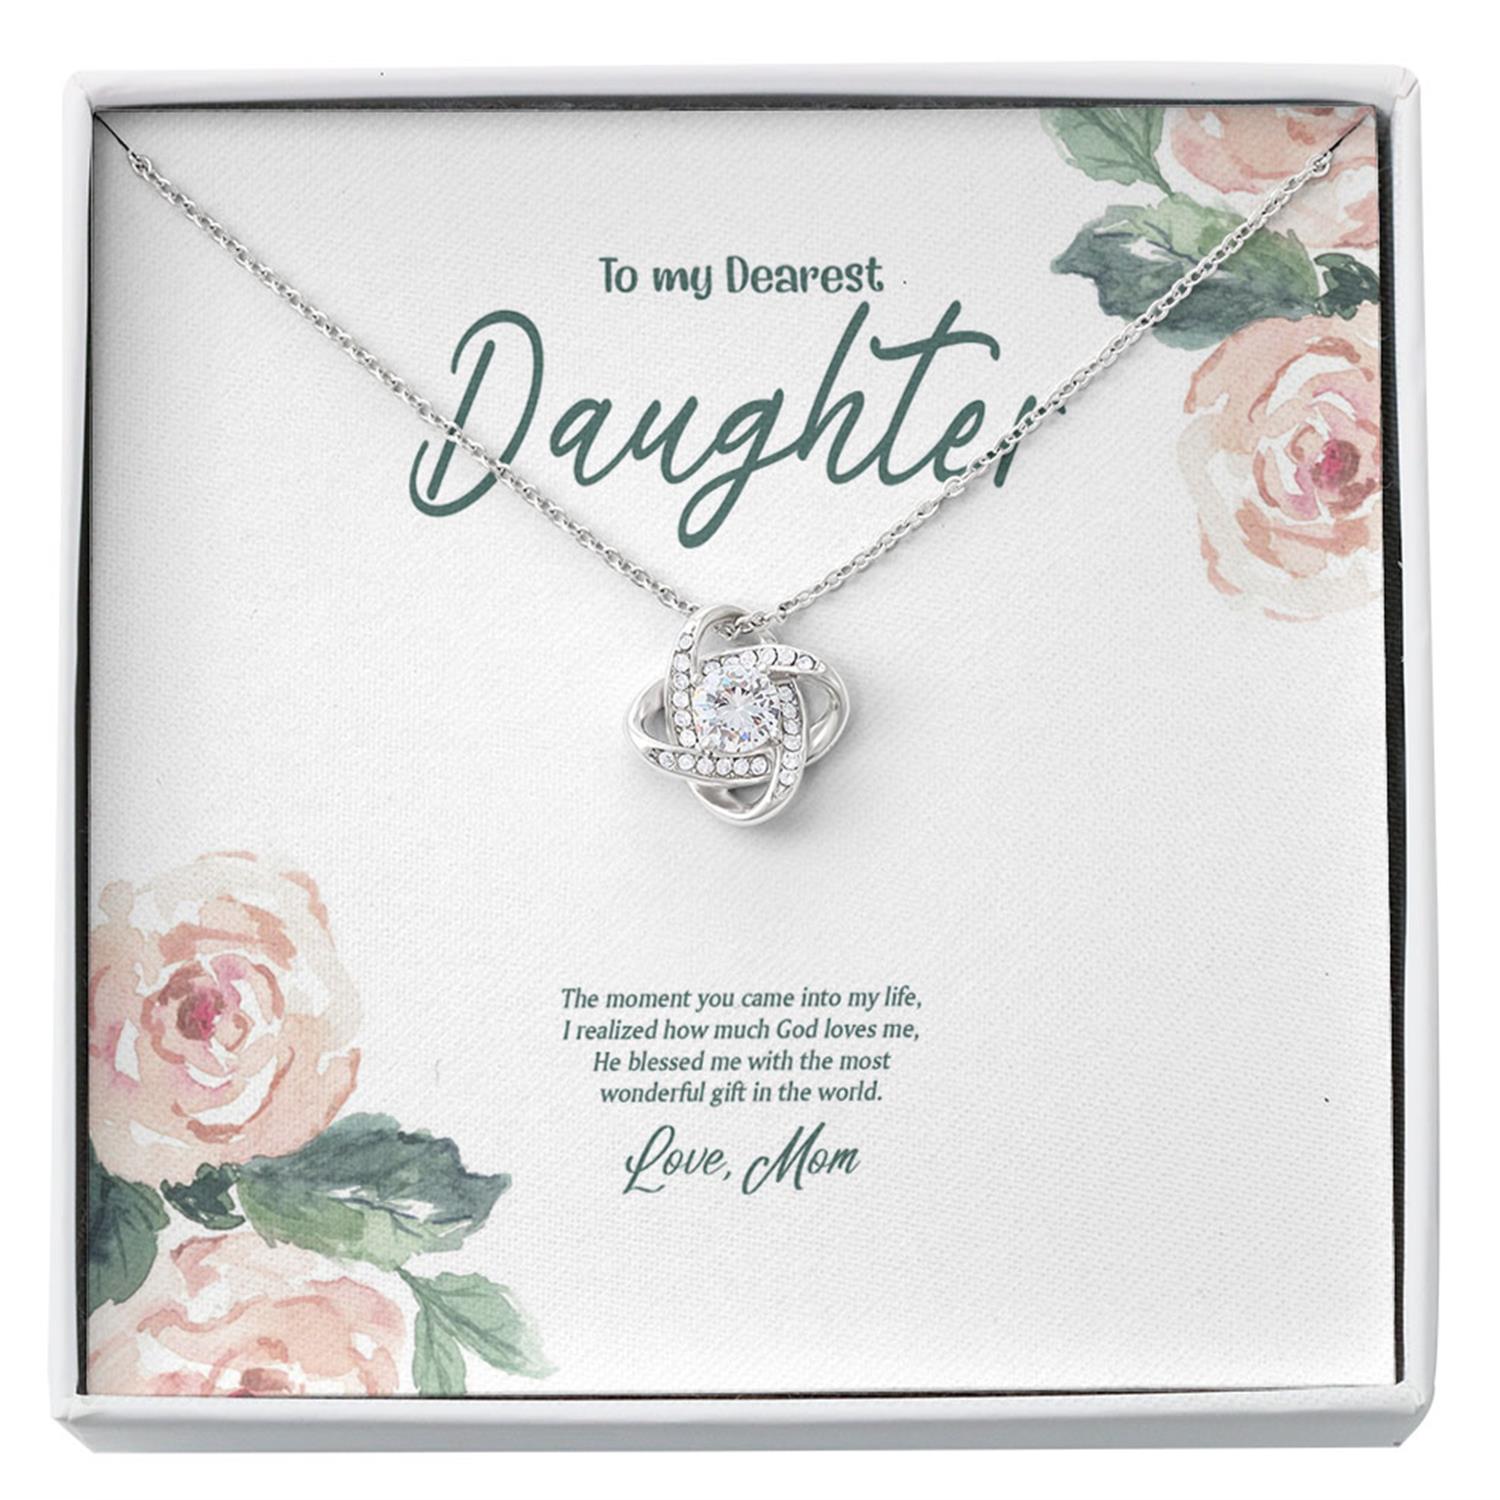 Daughter Necklace, To Dearest Daughter Necklace From Mom Came Life God Loves Me Most Wonderful Custom Necklace